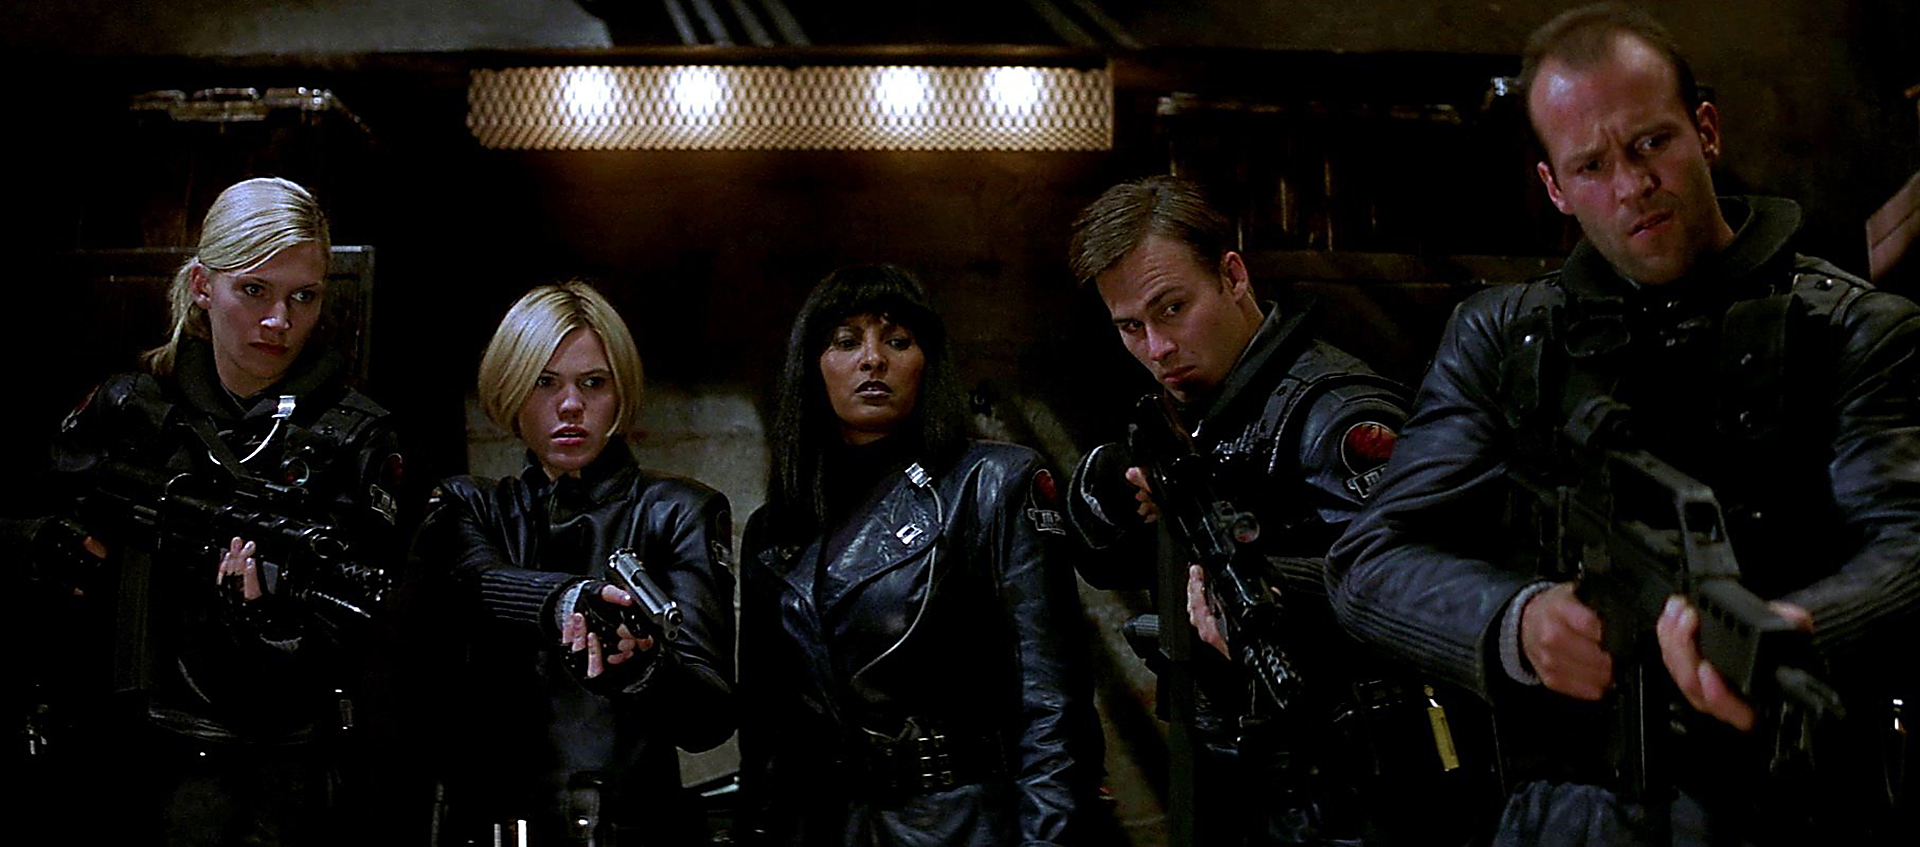 Five guntoting futuristic cops in black uniforms all stand point guns at something just out of view. Pam Grief stands in the center.